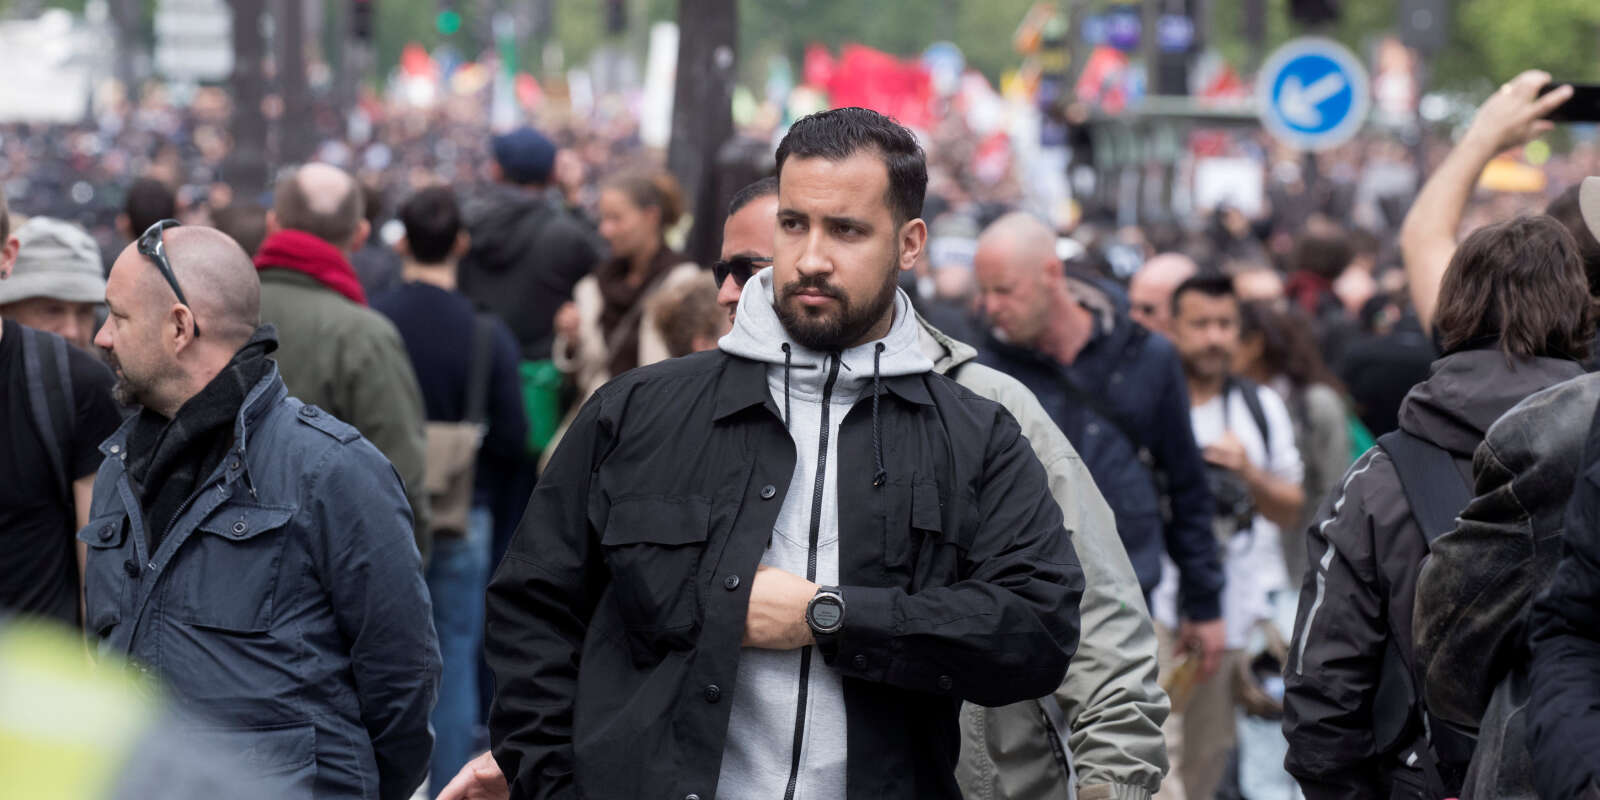 Alexandre Benalla, French presidential aide, is seen during the May Day labour union rally in Paris, France May 1, 2018. Picture taken May 1, 2018. REUTERS/Philippe Wojazer